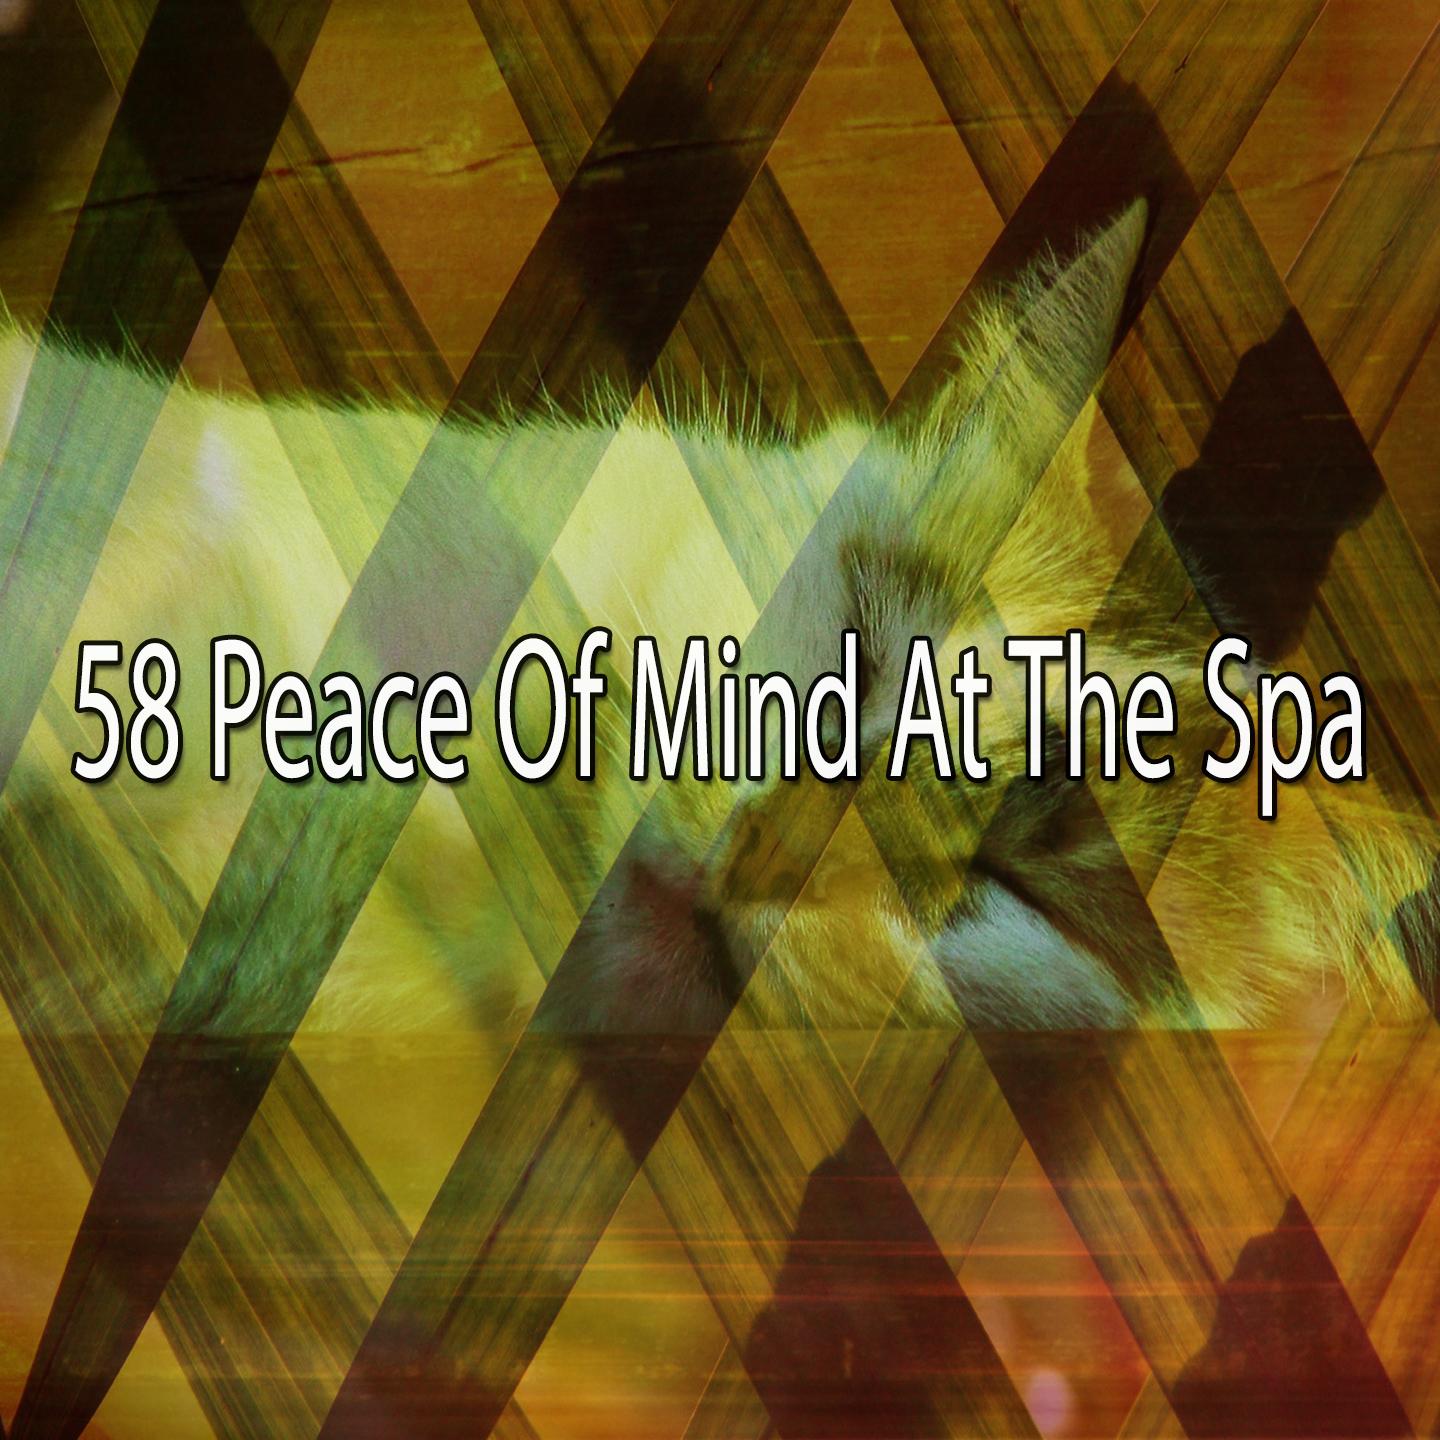 58 Peace of Mind at the Spa